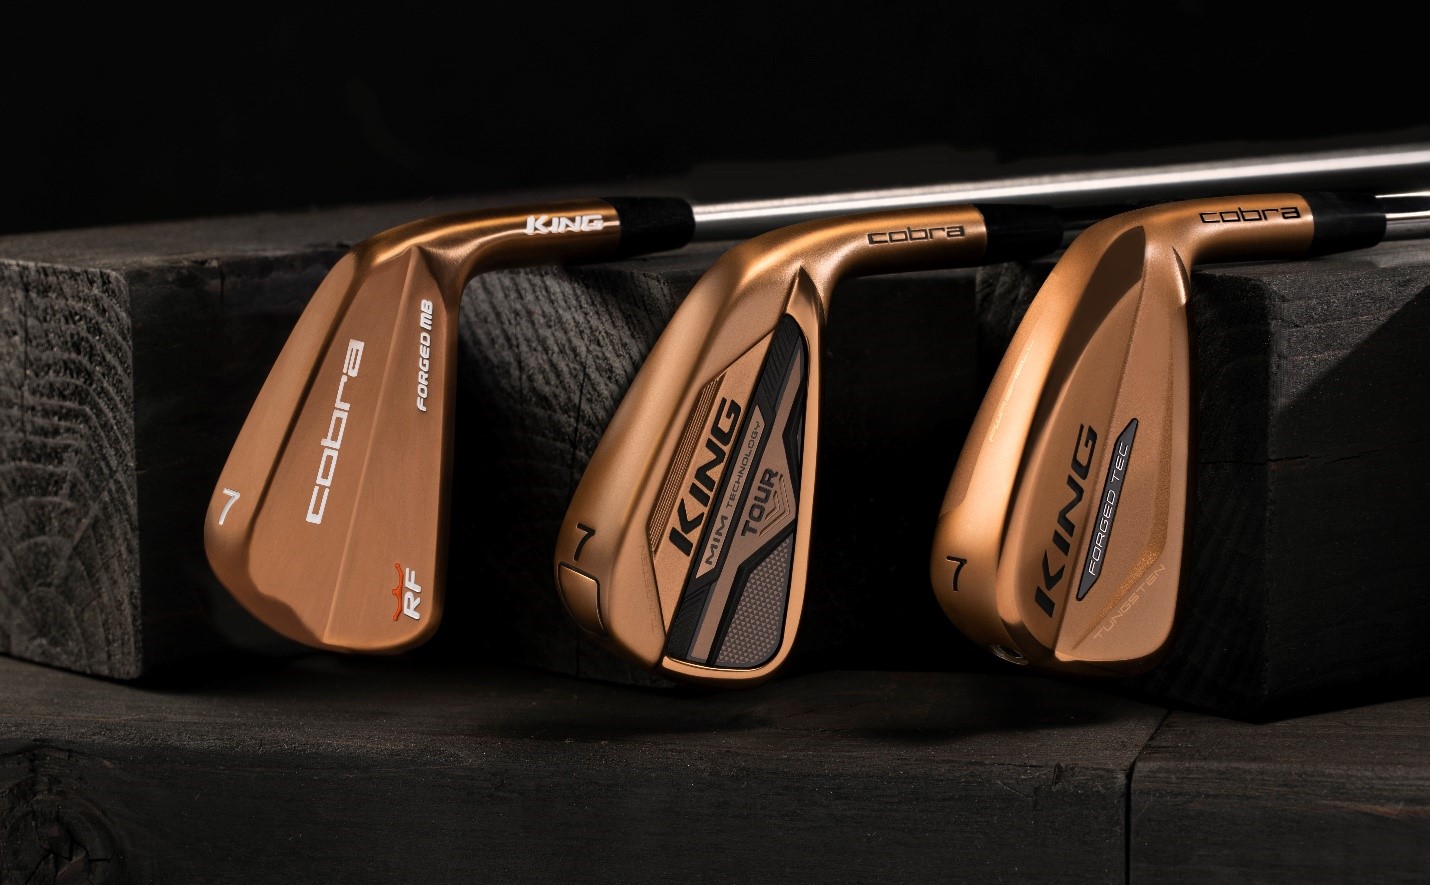 COBRA GOLF UNVEILS THE COPPER SERIES PLAYERS IRONS TO SATISFY THE MOST DEMANDING SHOTMAKERS